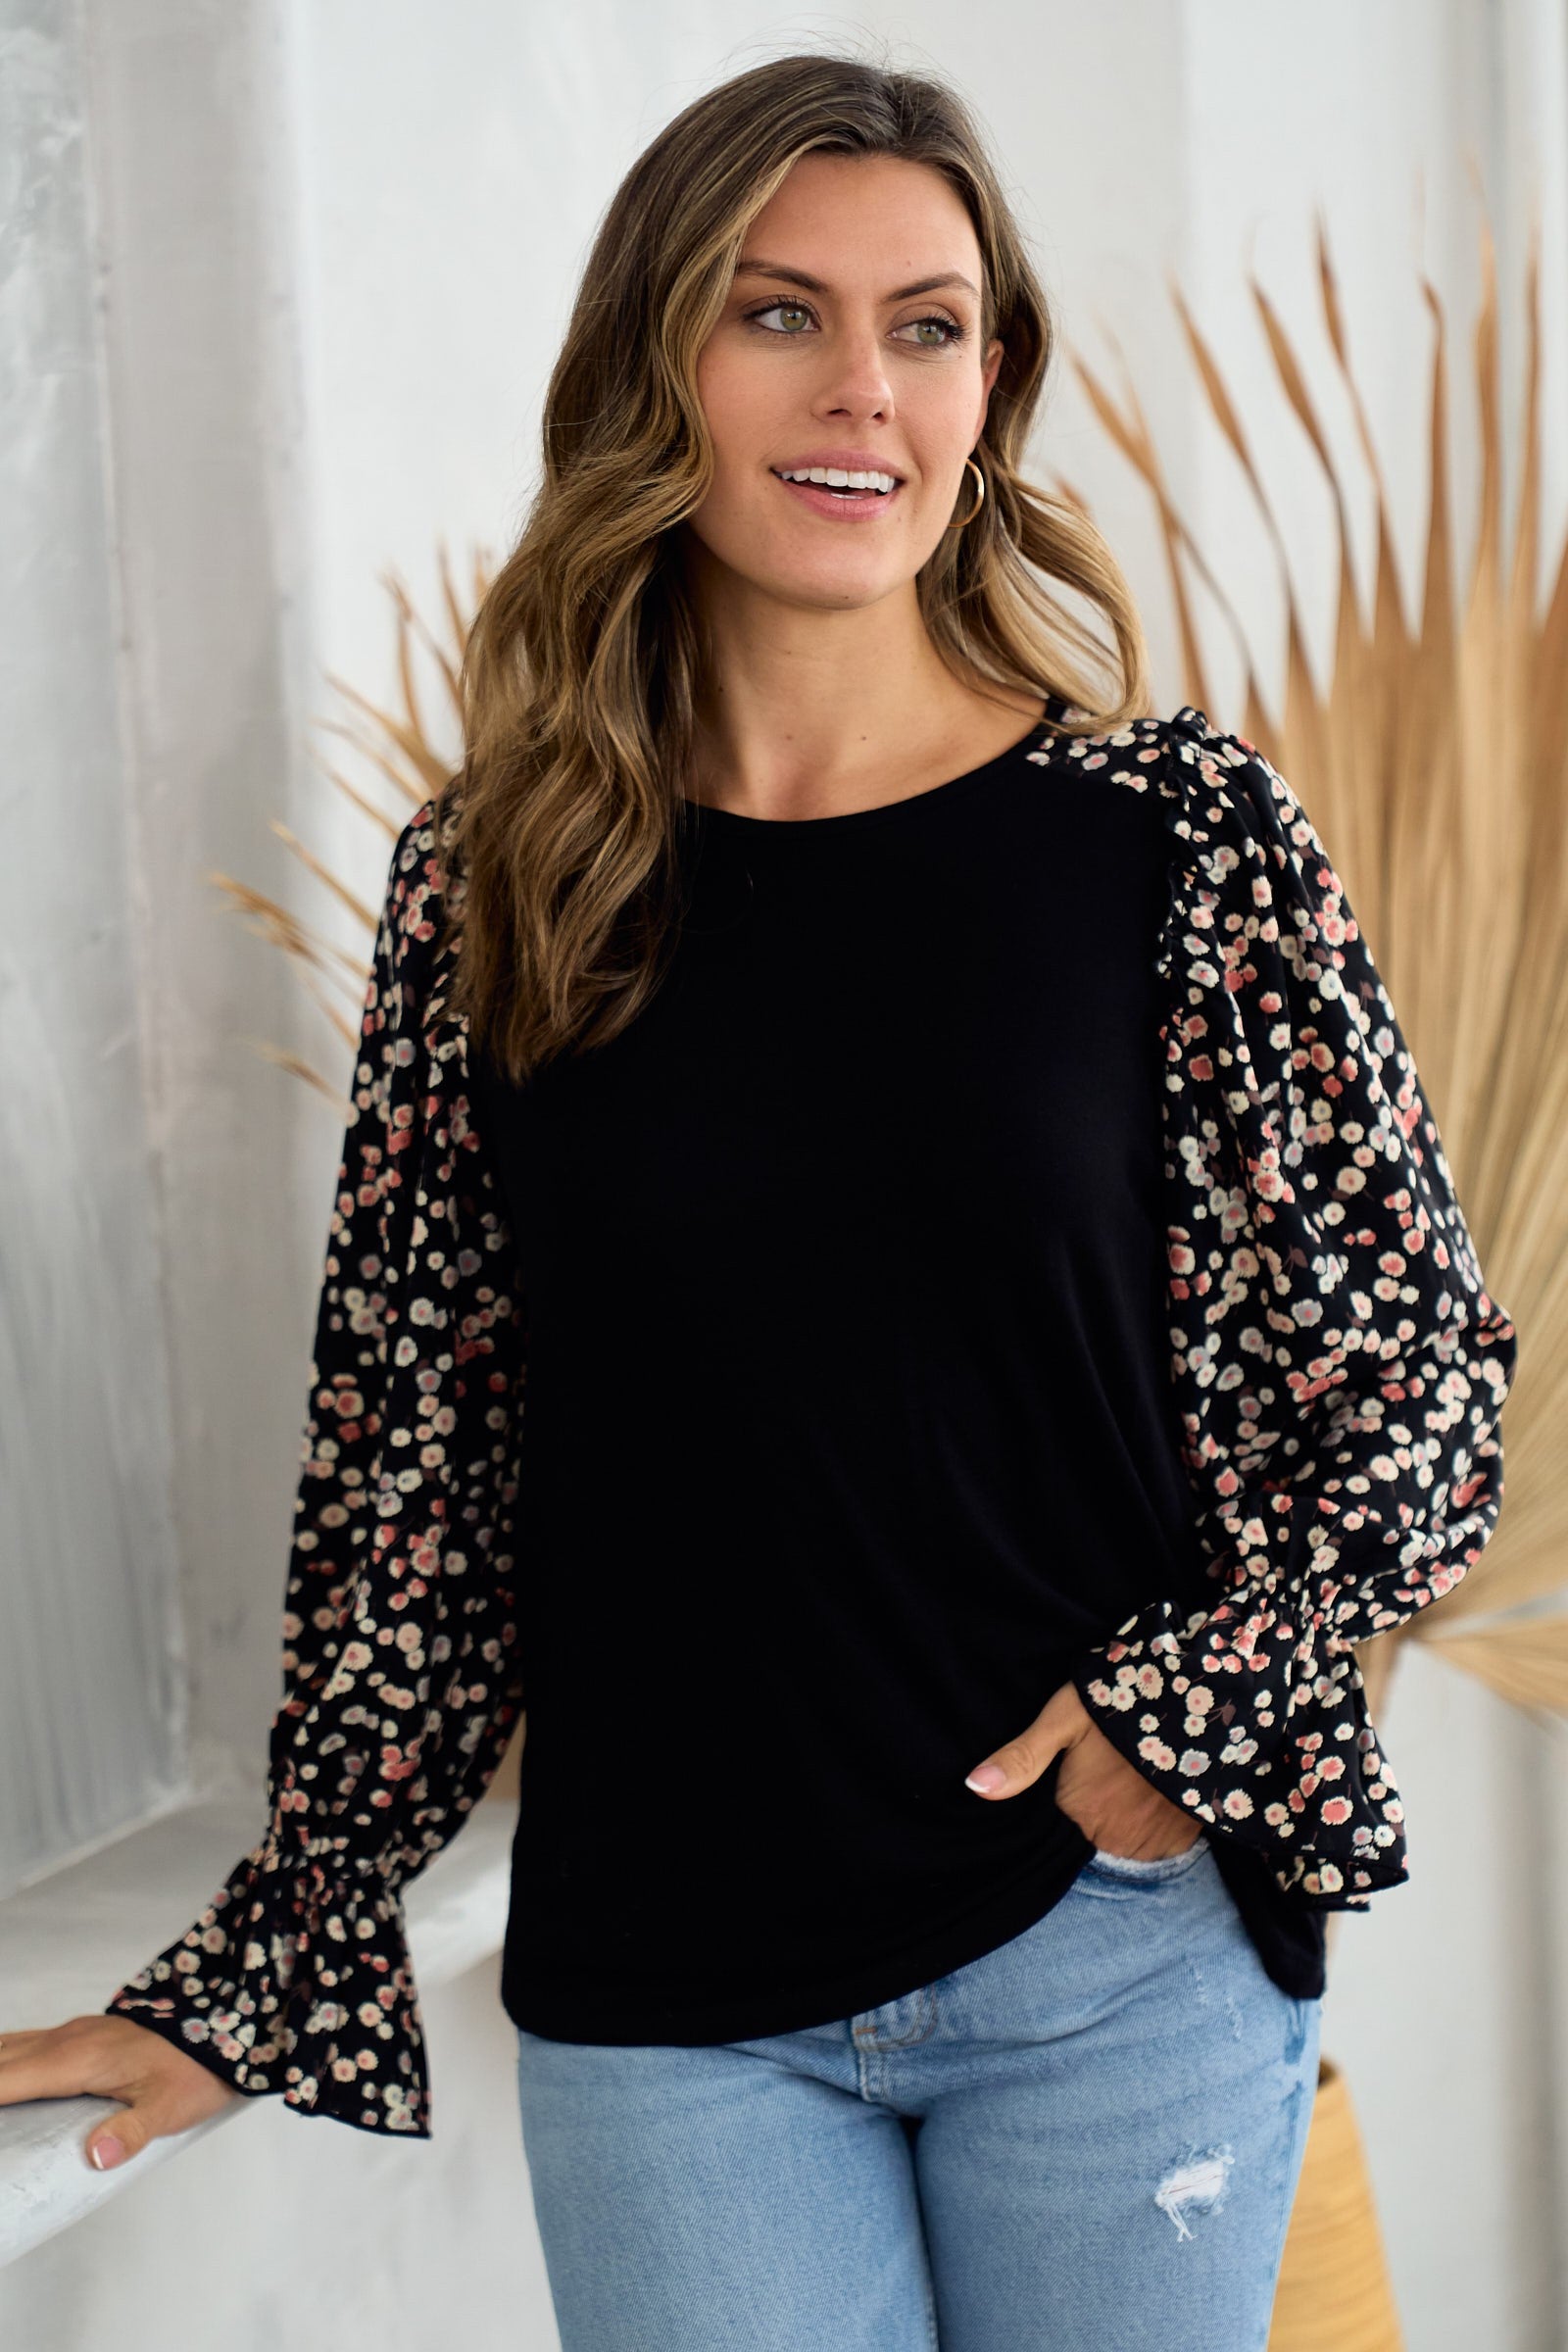 Meet You There Floral Sleeve Top in Black - Curvy